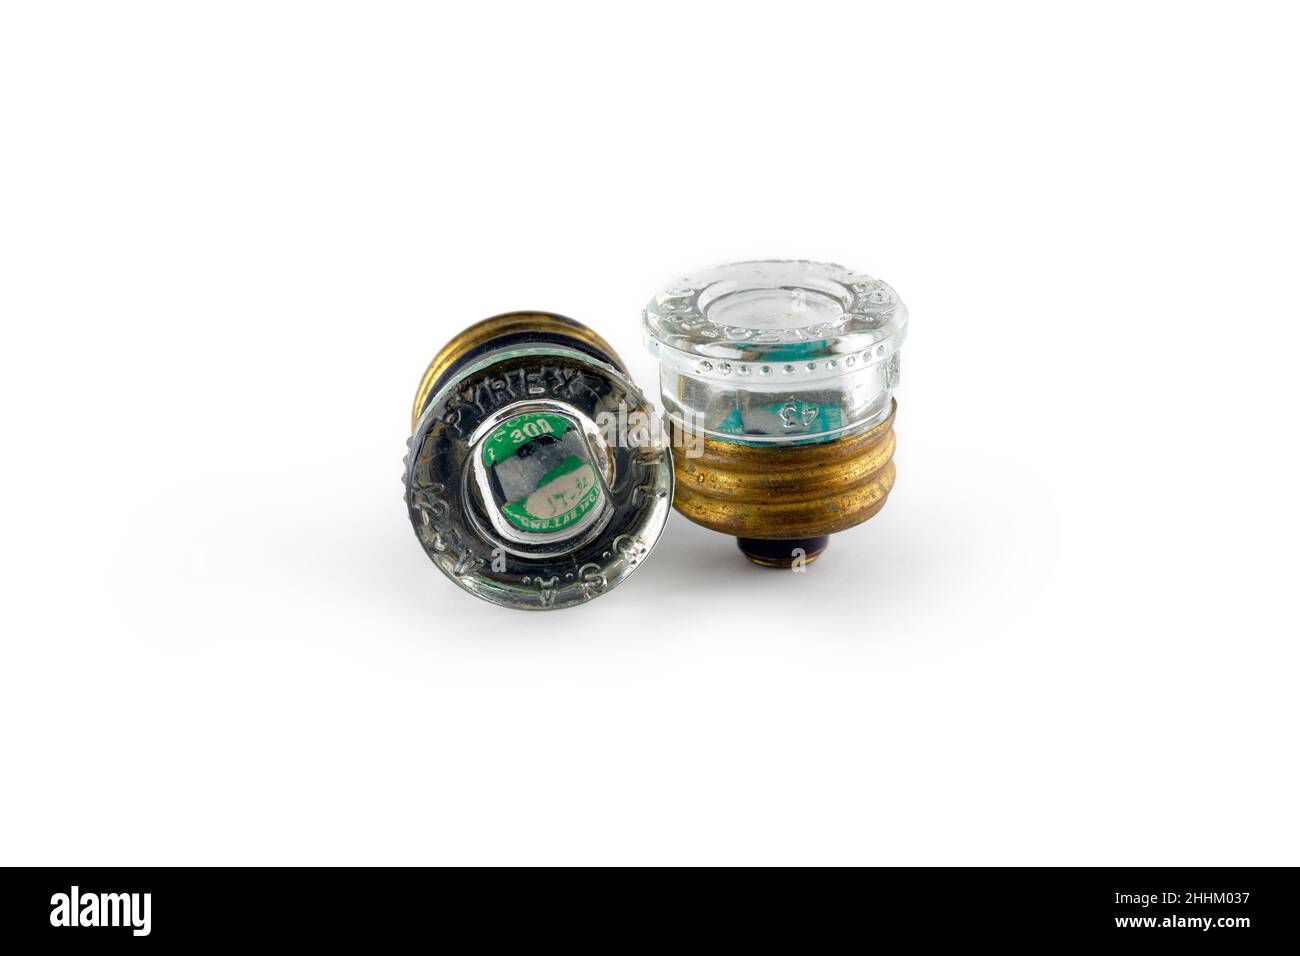 A pair of Edison base, 30A pyrex glass plug fuses isolated on a white background. cutout image for editorial and illustration use. Stock Photo